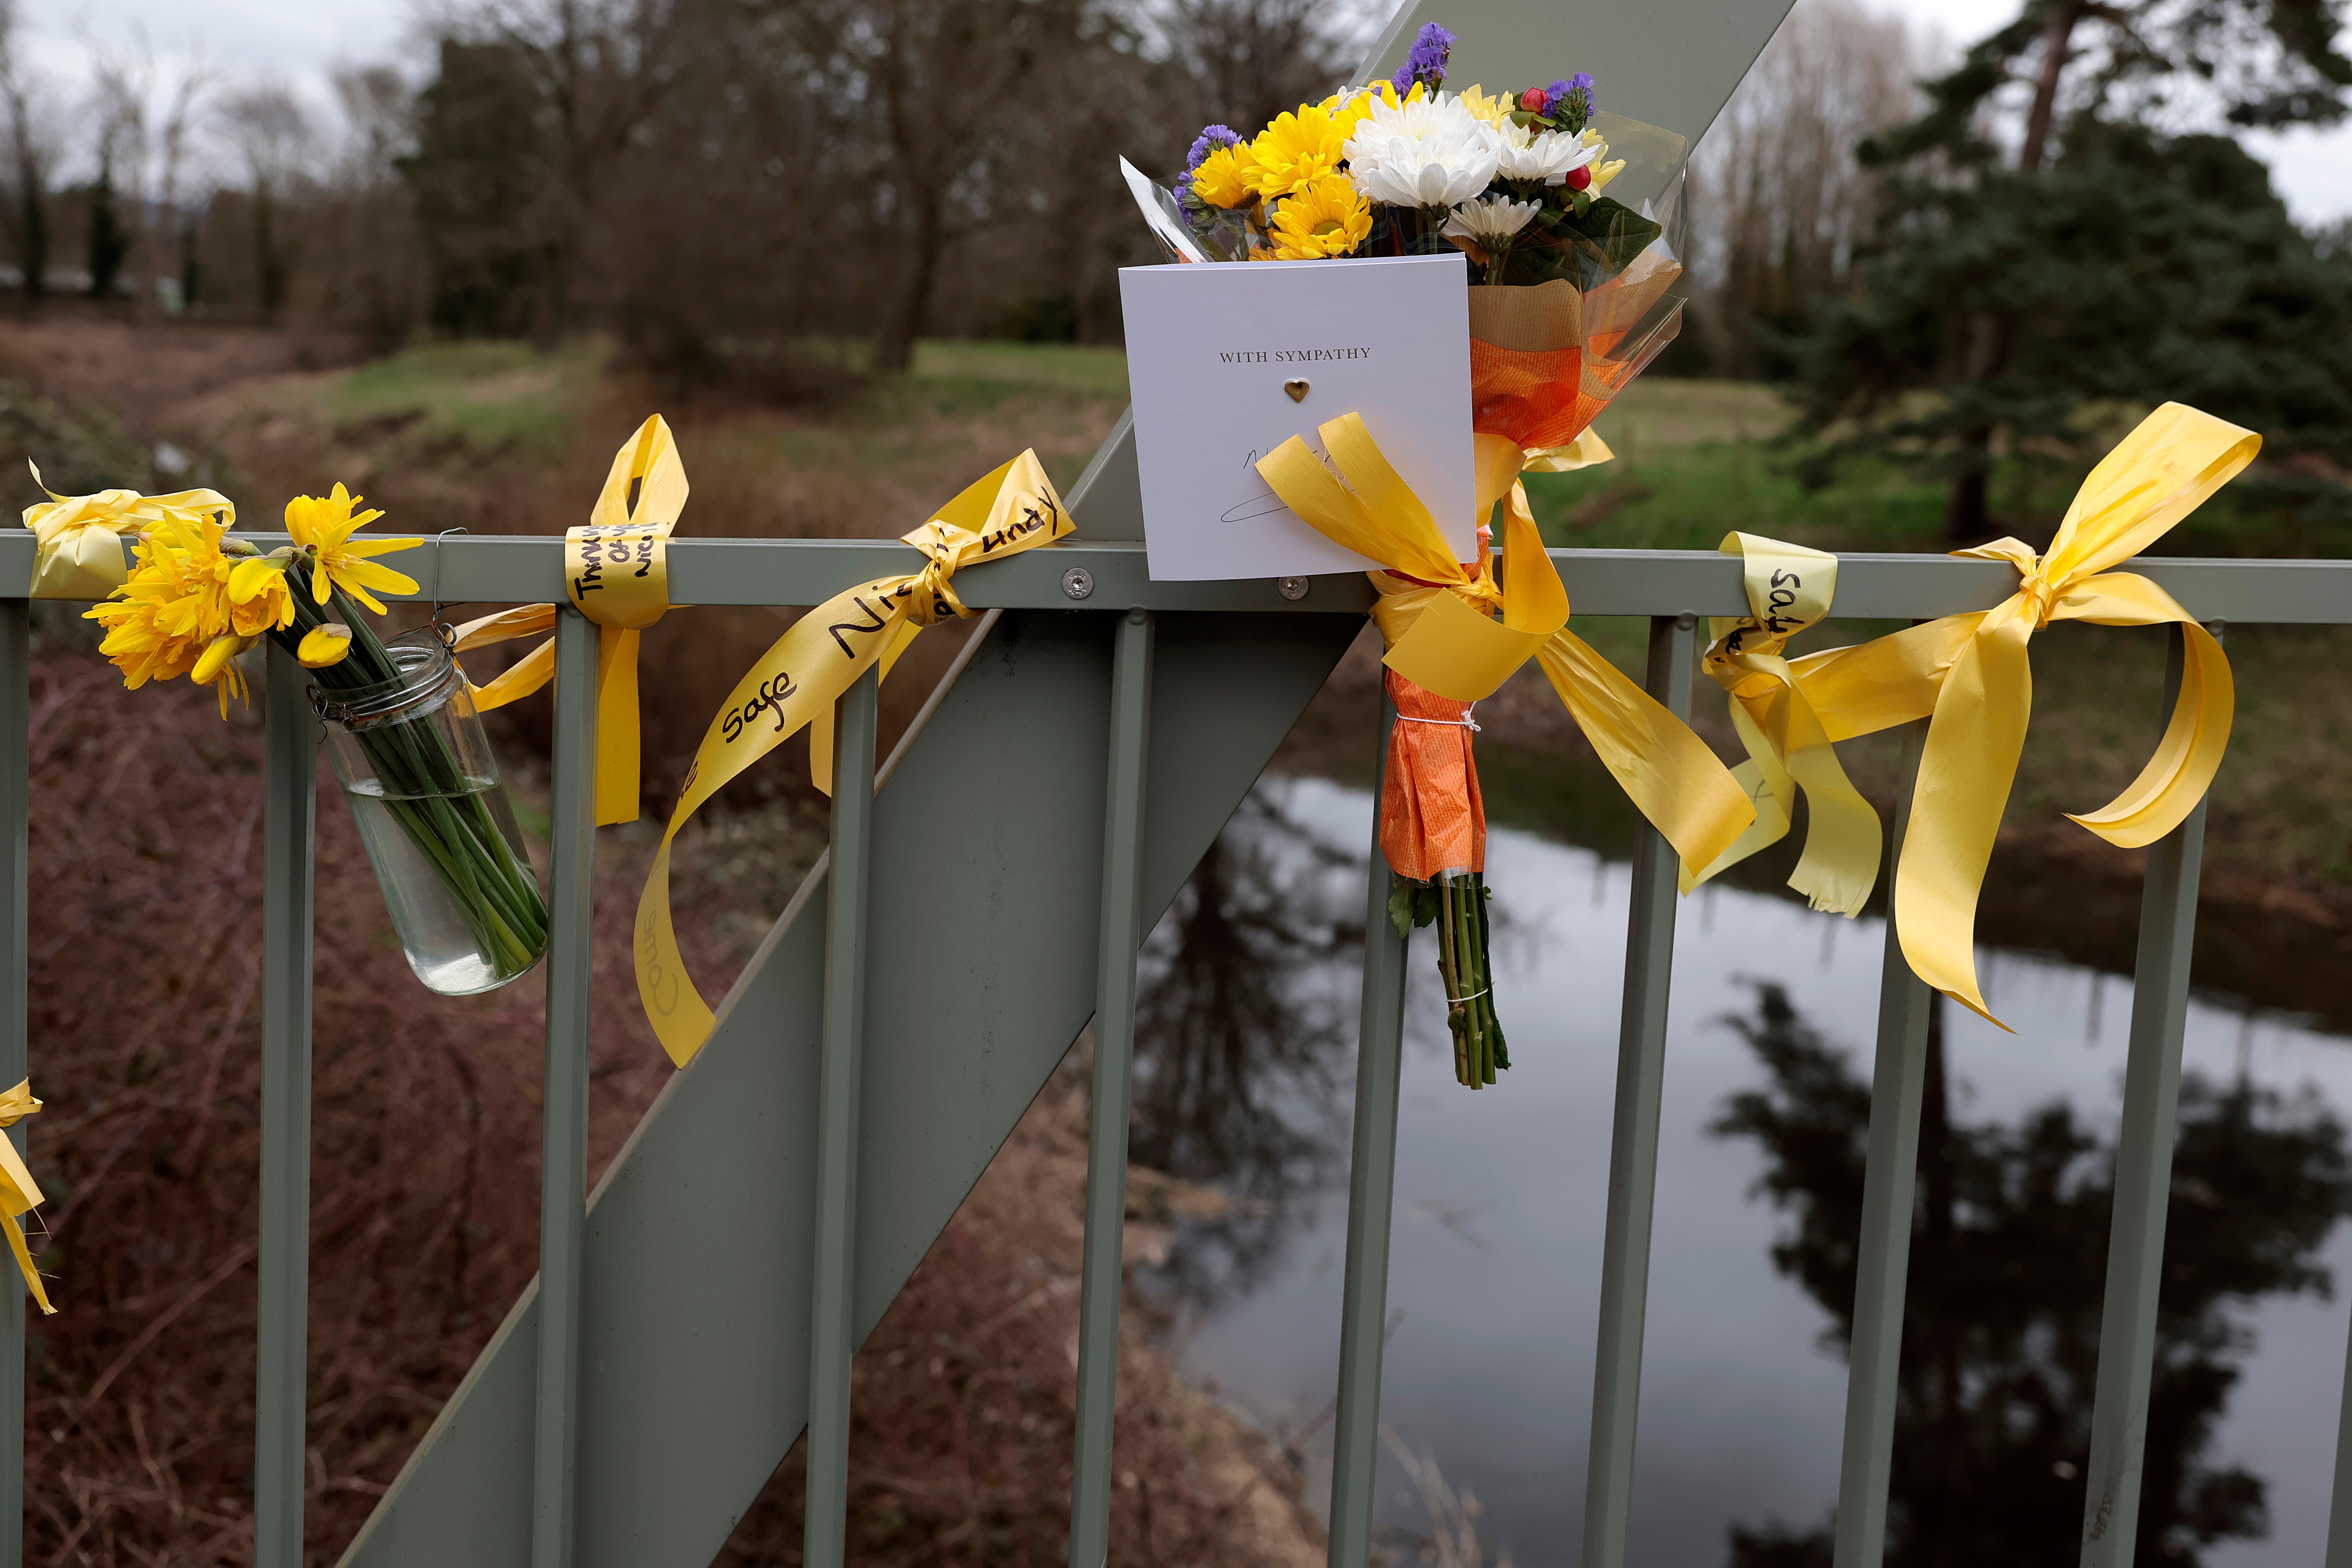 Flowers and ribbons were left close to the site where Nicola Bulley went missing in St Michael’s on Wyre